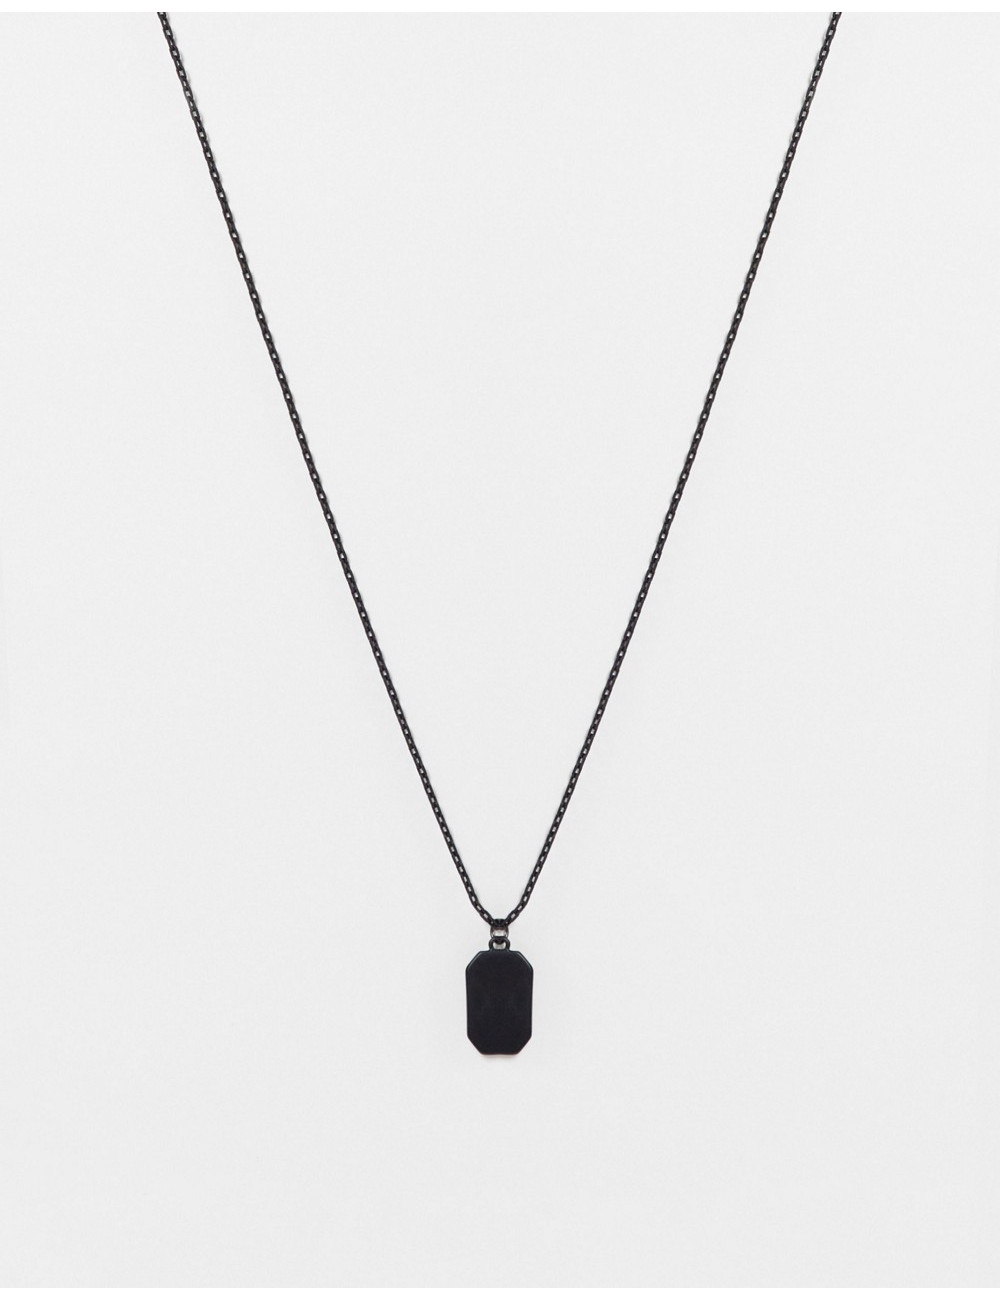 River Island dog tag necklace